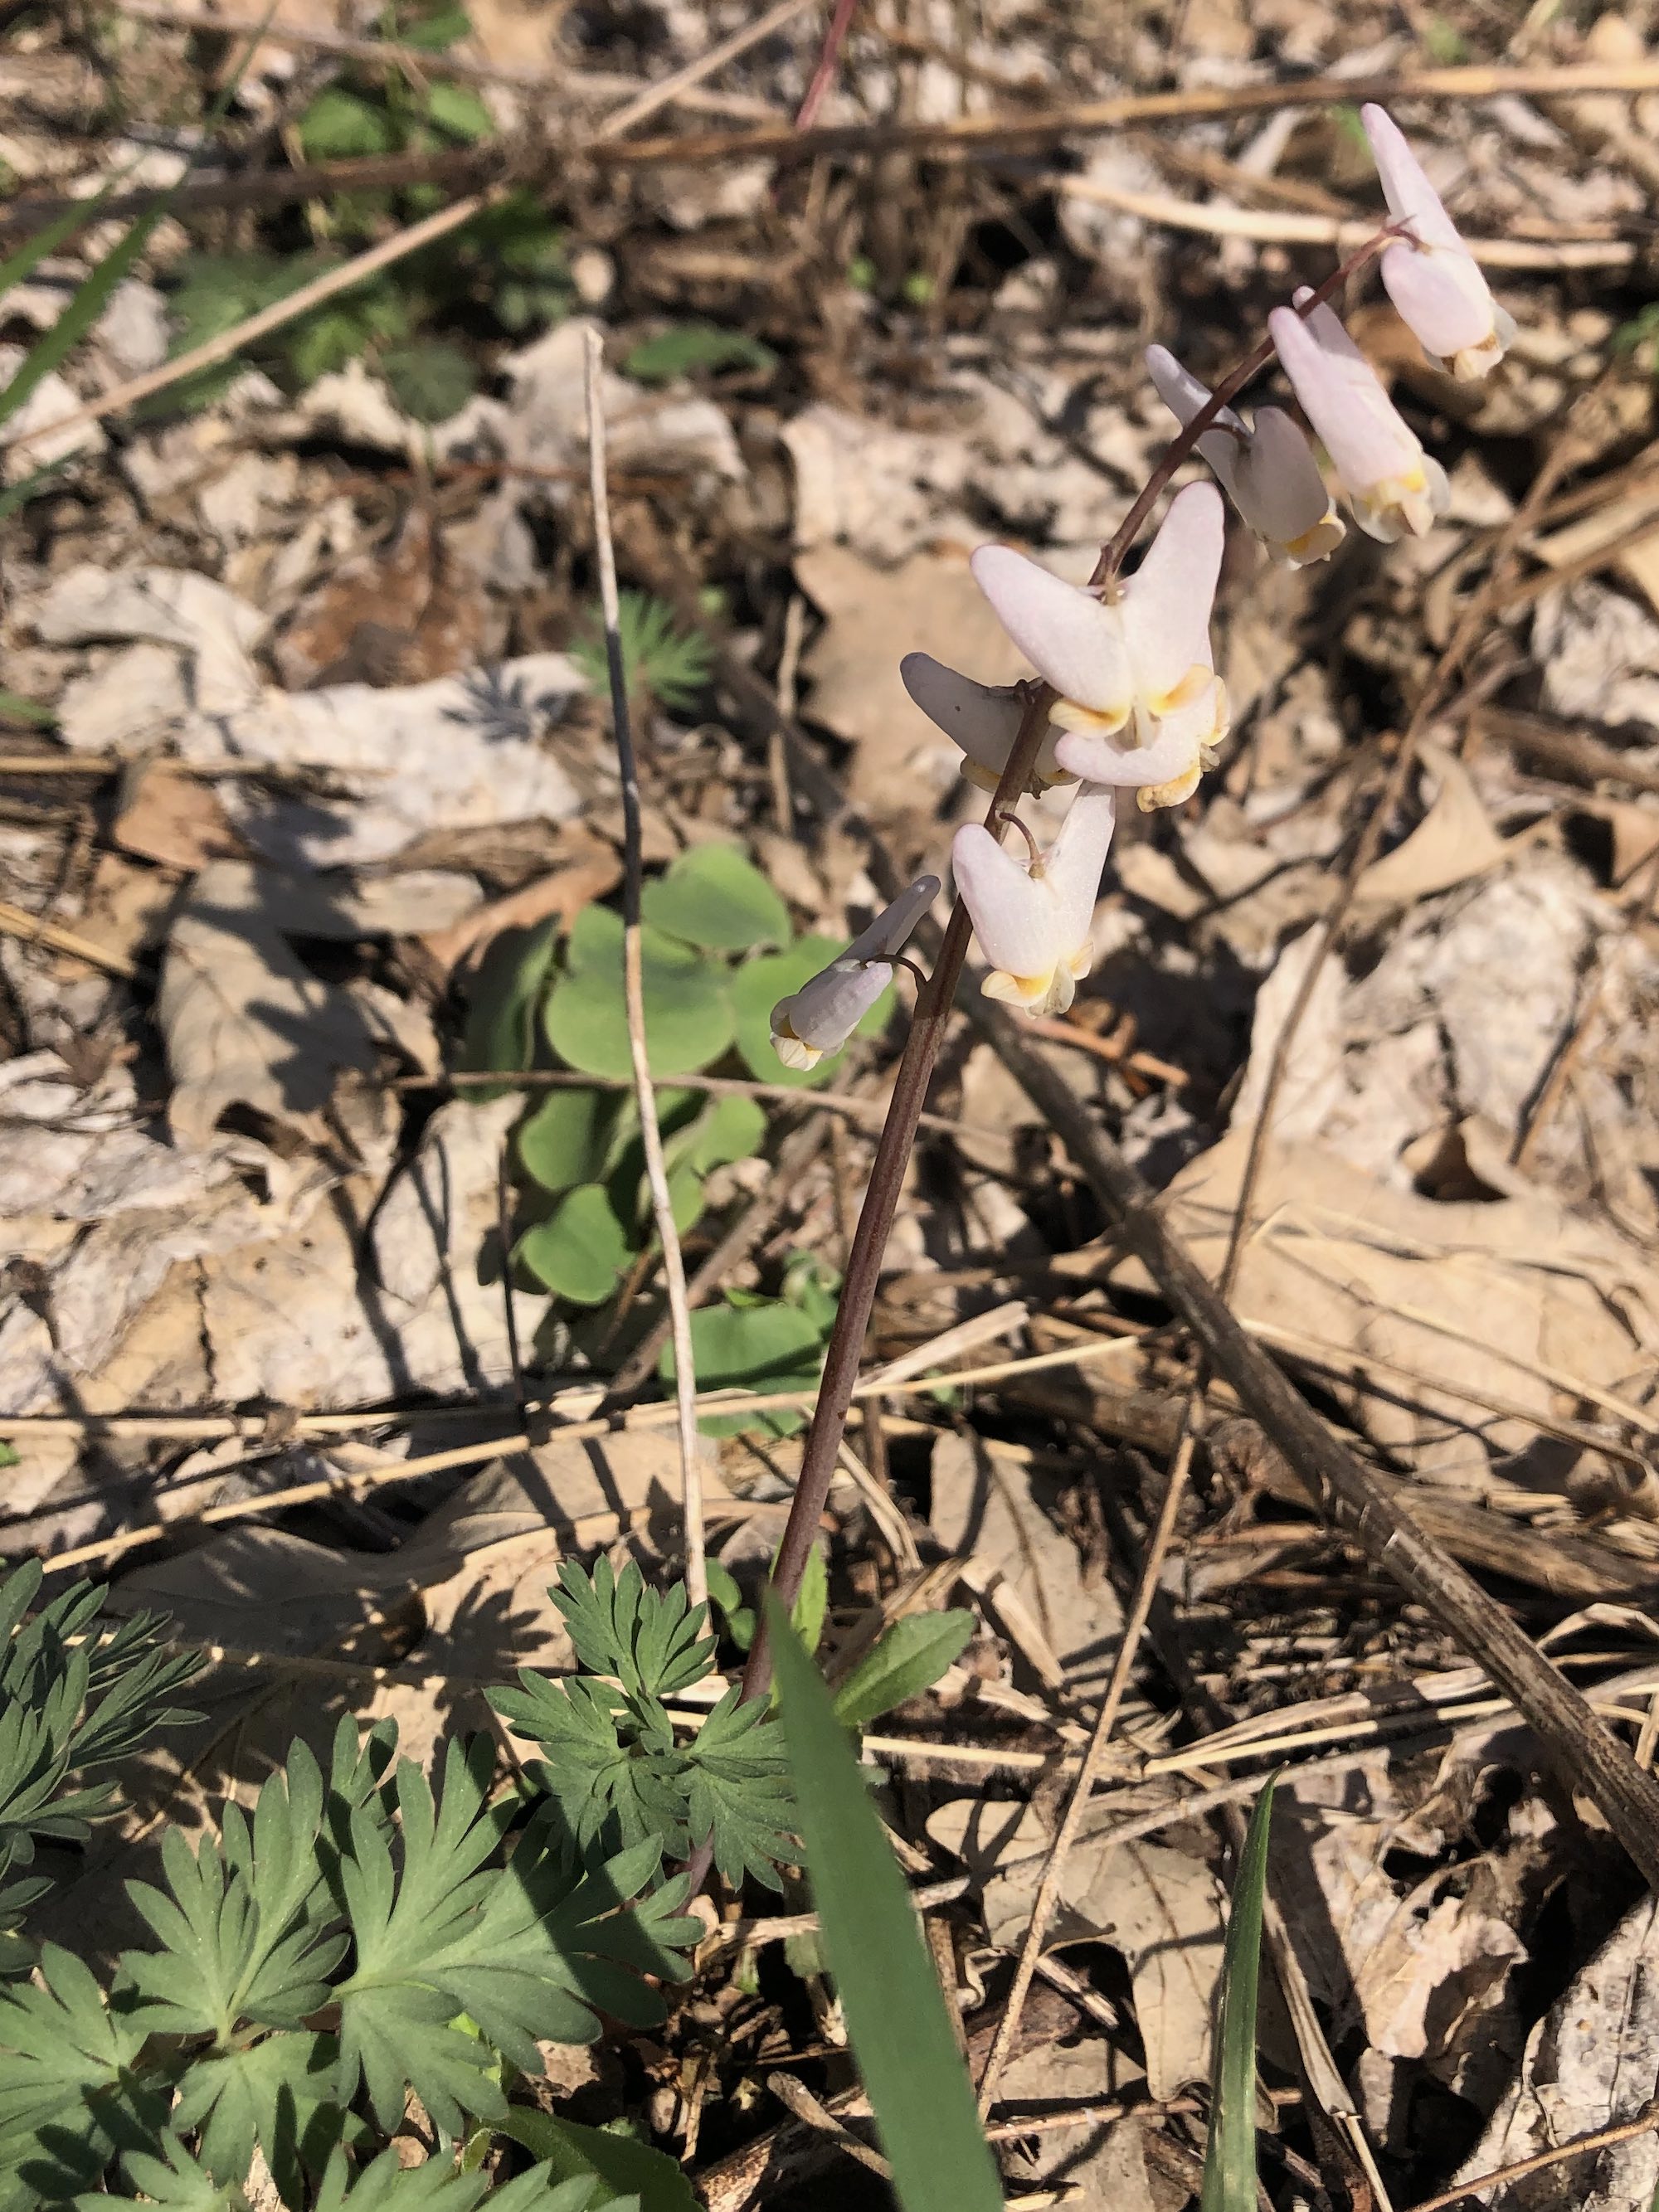 Dutchman's Breeches by Council Ring in the University of Wisconsin Arboretum Oak Savanna on April 15, 2023.